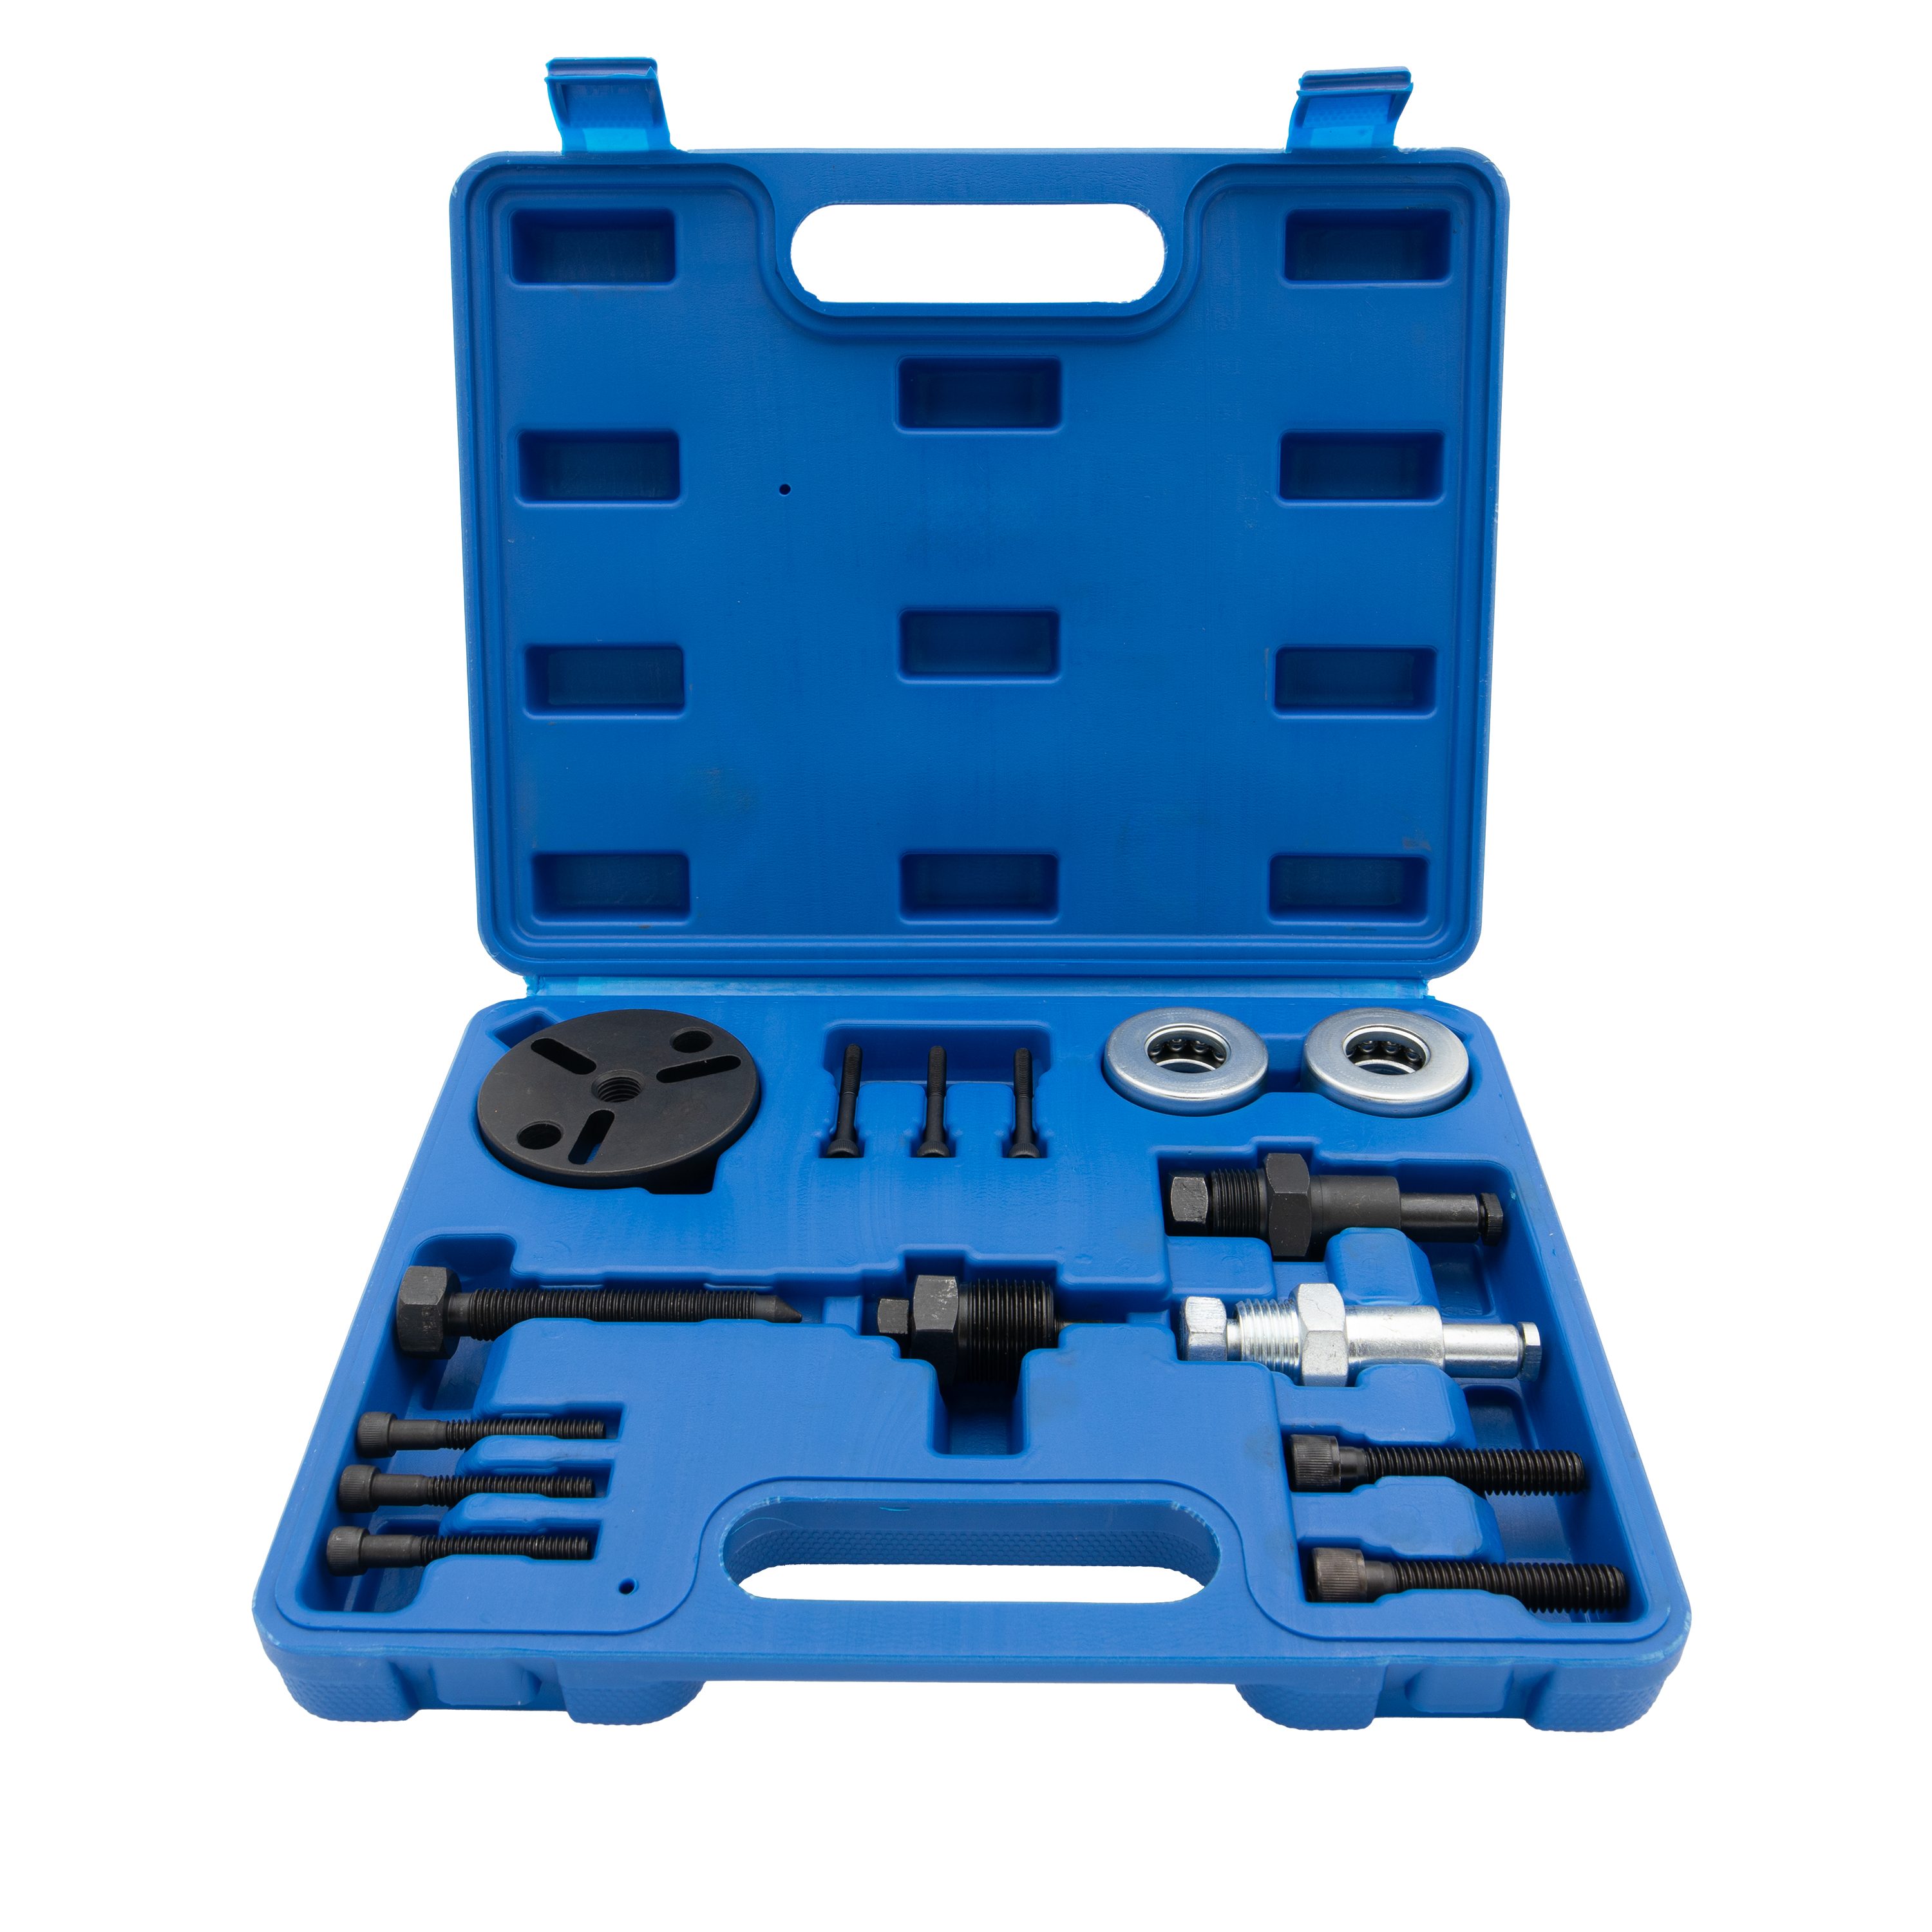  PMD Products AC Clutch Removal Tool - 23 Piece